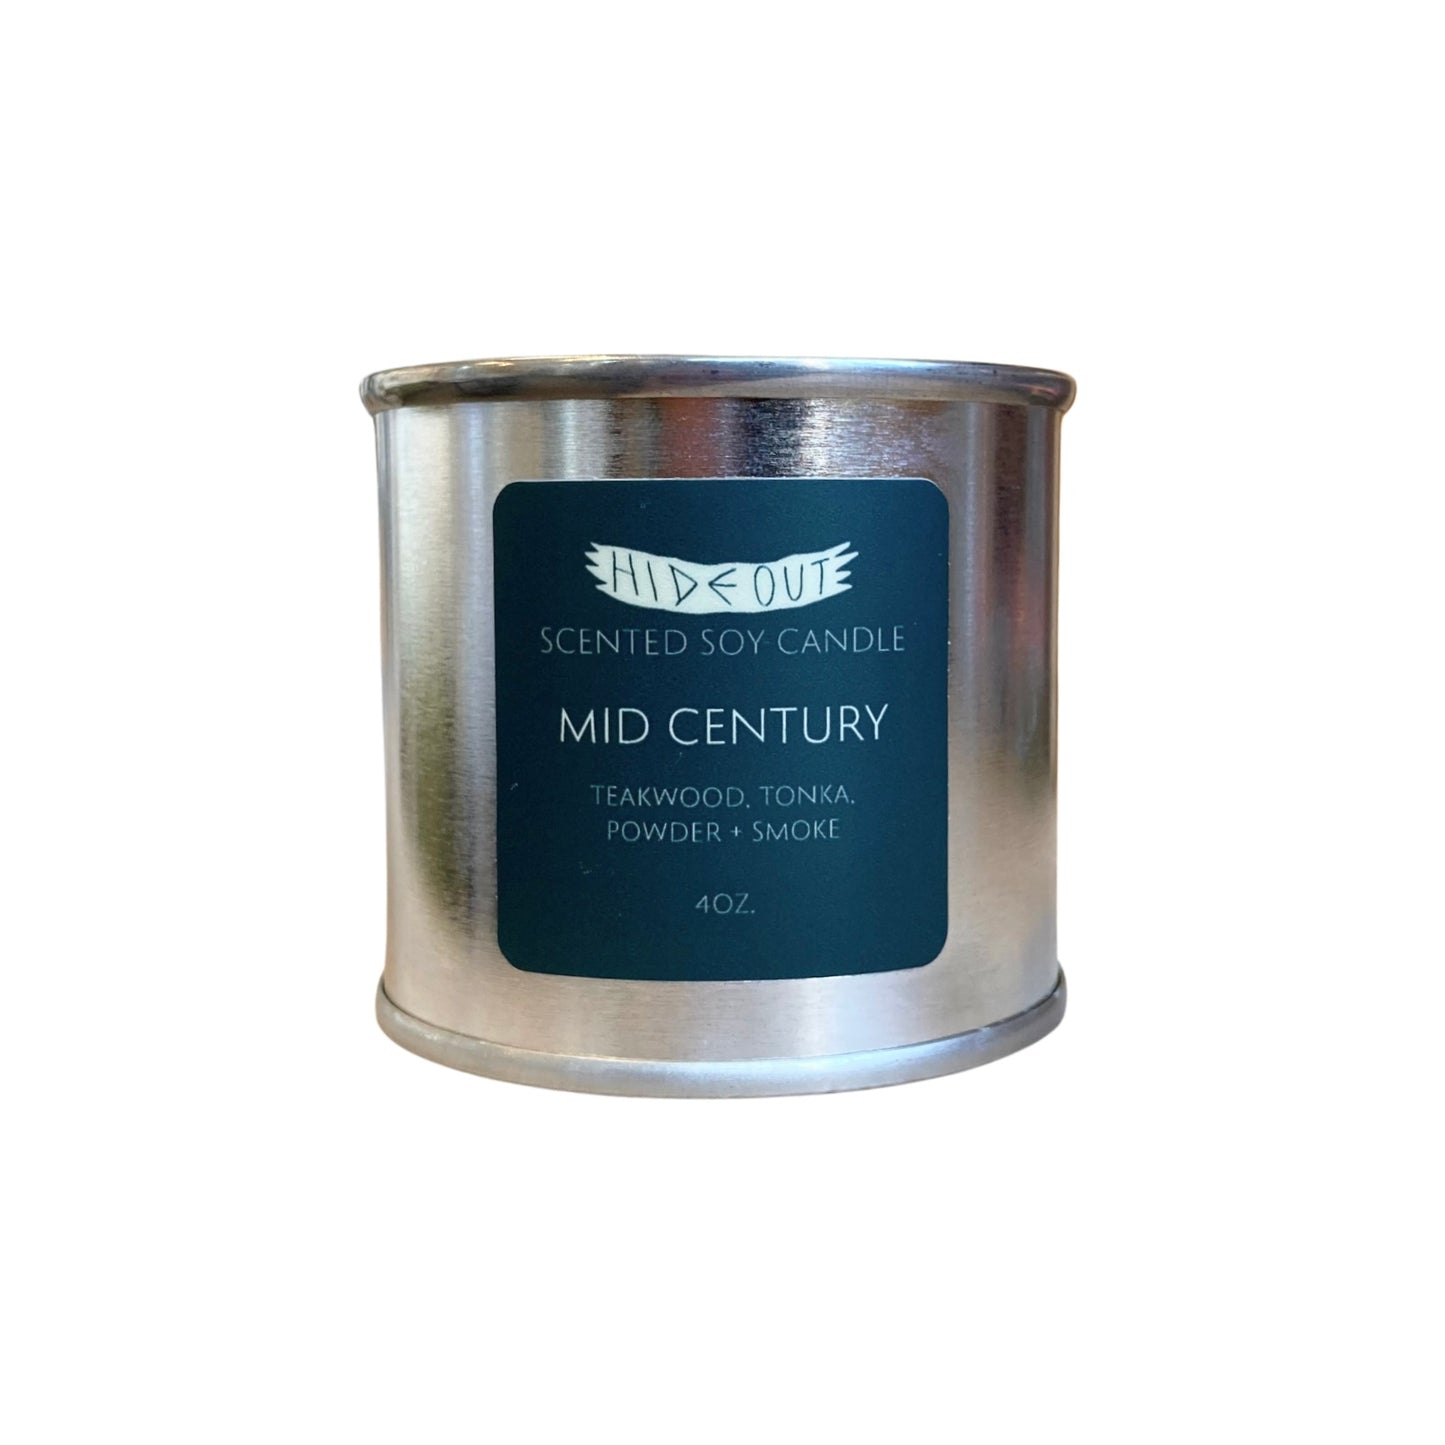 Scented Soy Candle | Midcentury | Teakwood, Tonka, Brandy + Hint of Pipe Tobacco